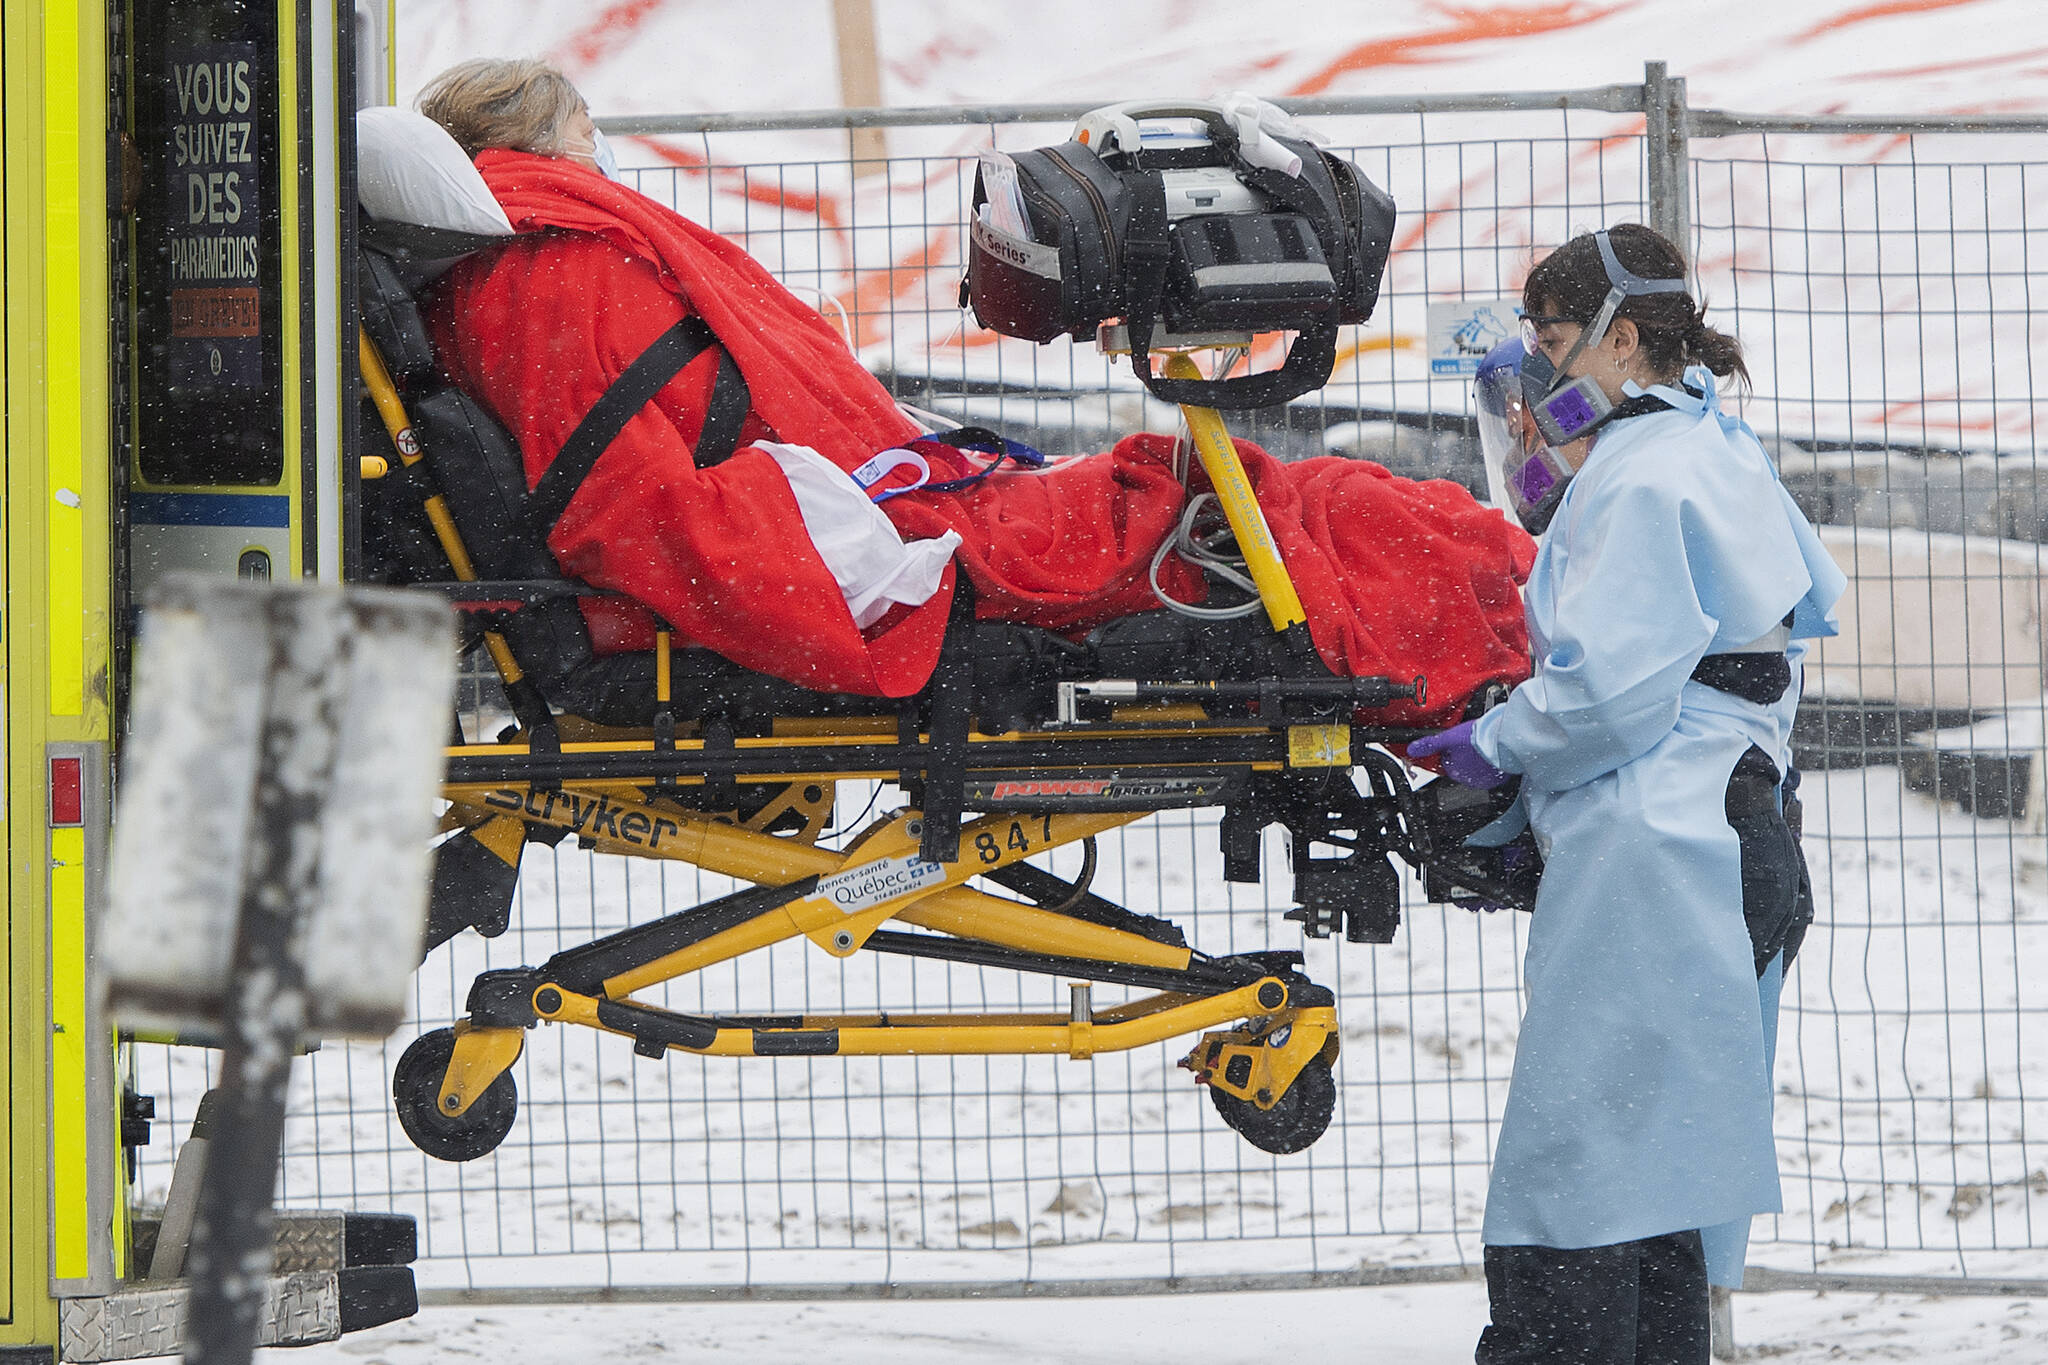 Paramedics transfer a person from an ambulance into a hospital in Montreal, Sunday, Jan. 9, 2022. The Health Department says data from the last 24 hours indicates a 140-jump in hospitalization from the previous day, for a total of 2,436. The province is also reporting 11,007 new cases of COVID-19. THE CANADIAN PRESS/Graham Hughes